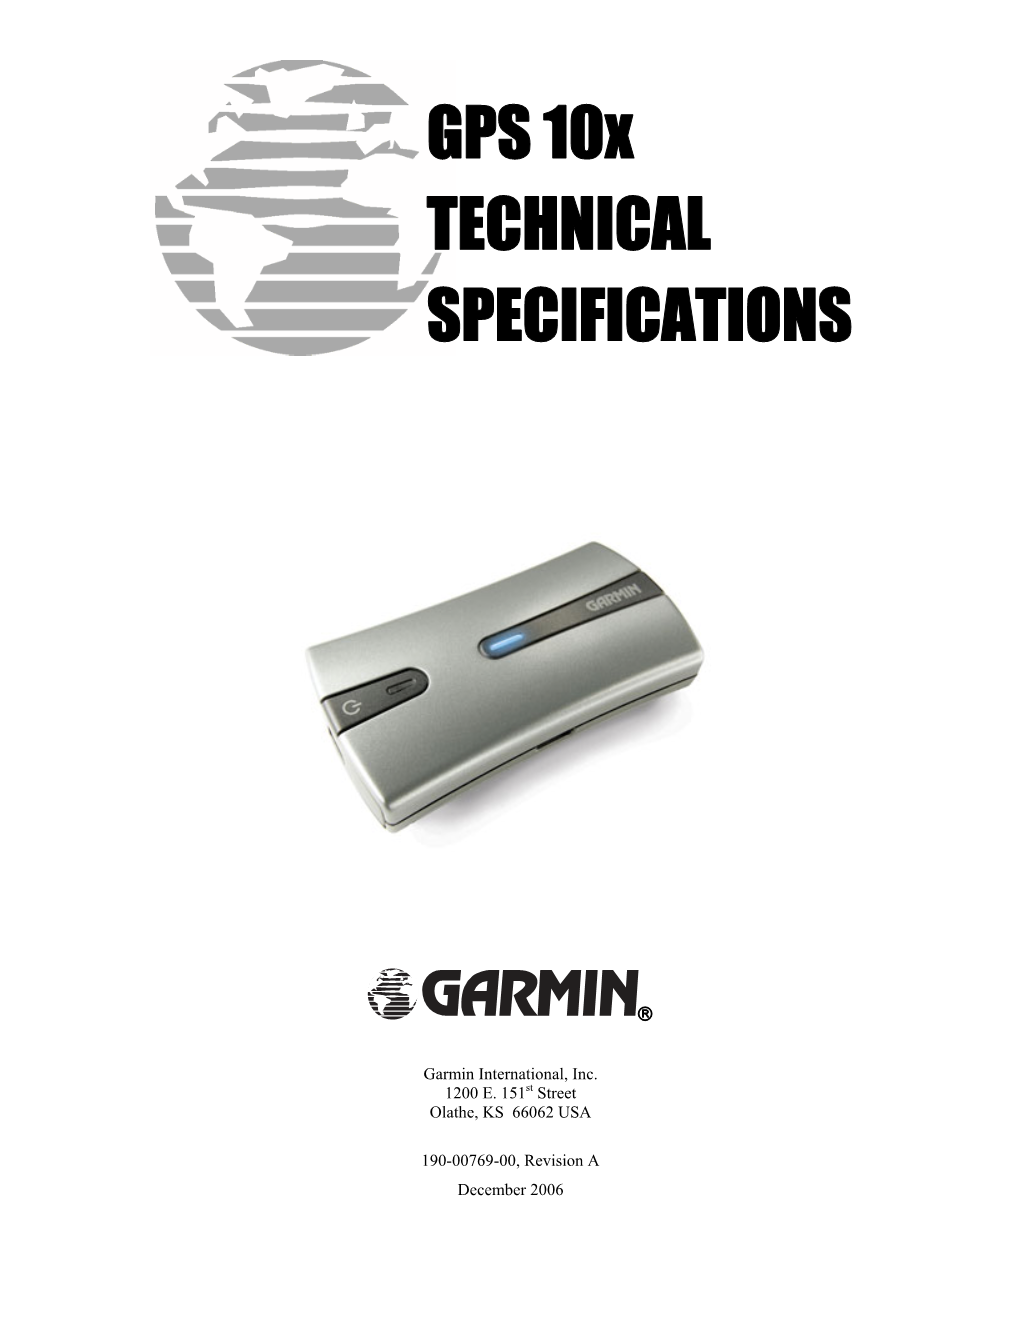 GPS 10X Technical Specifications Rev